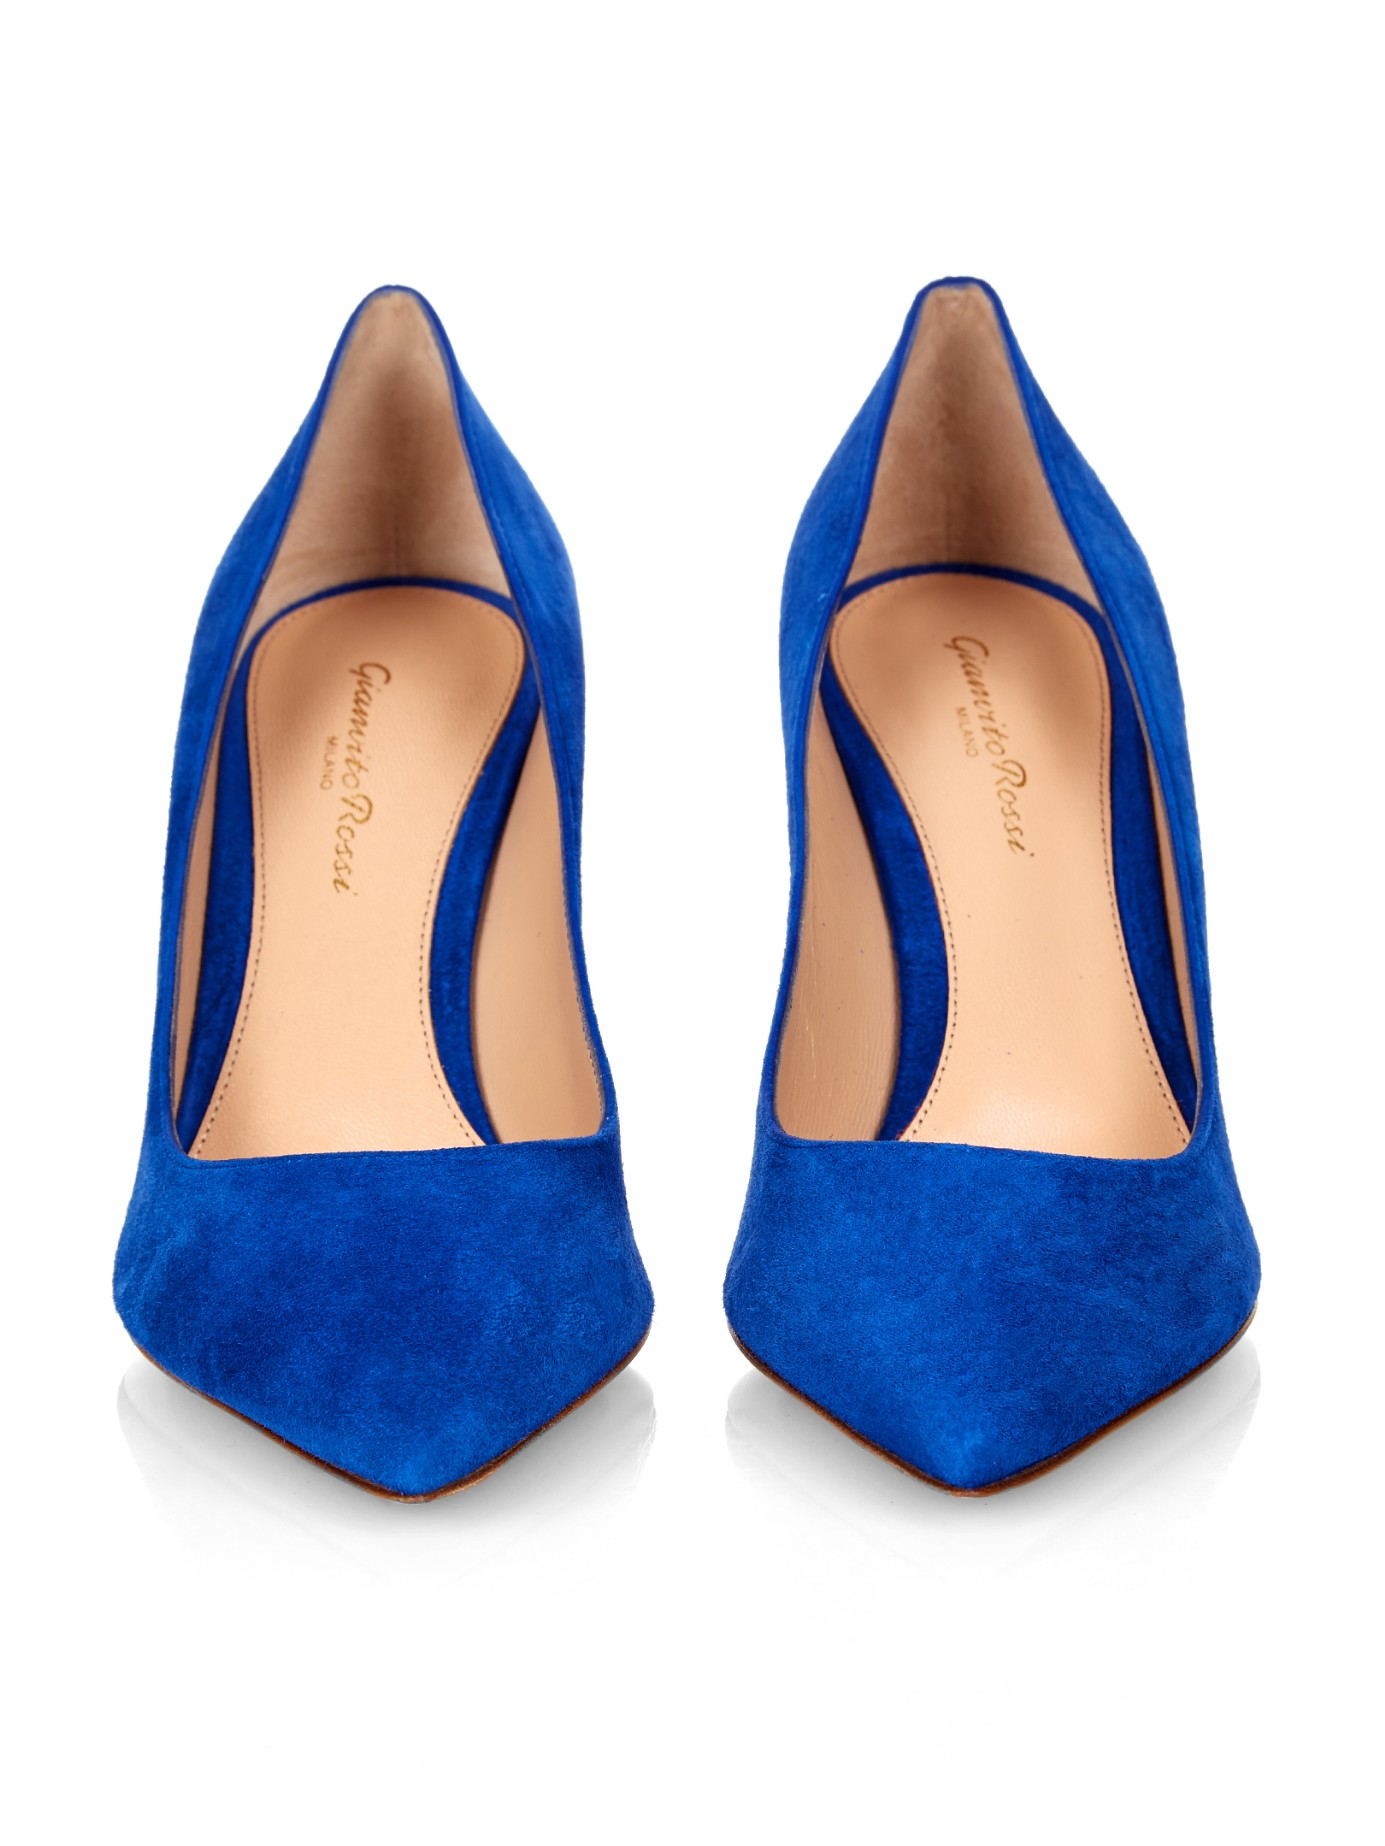 Blue suede pumps lyst - gianvito rossi business suede pumps in blue SPHOHQI